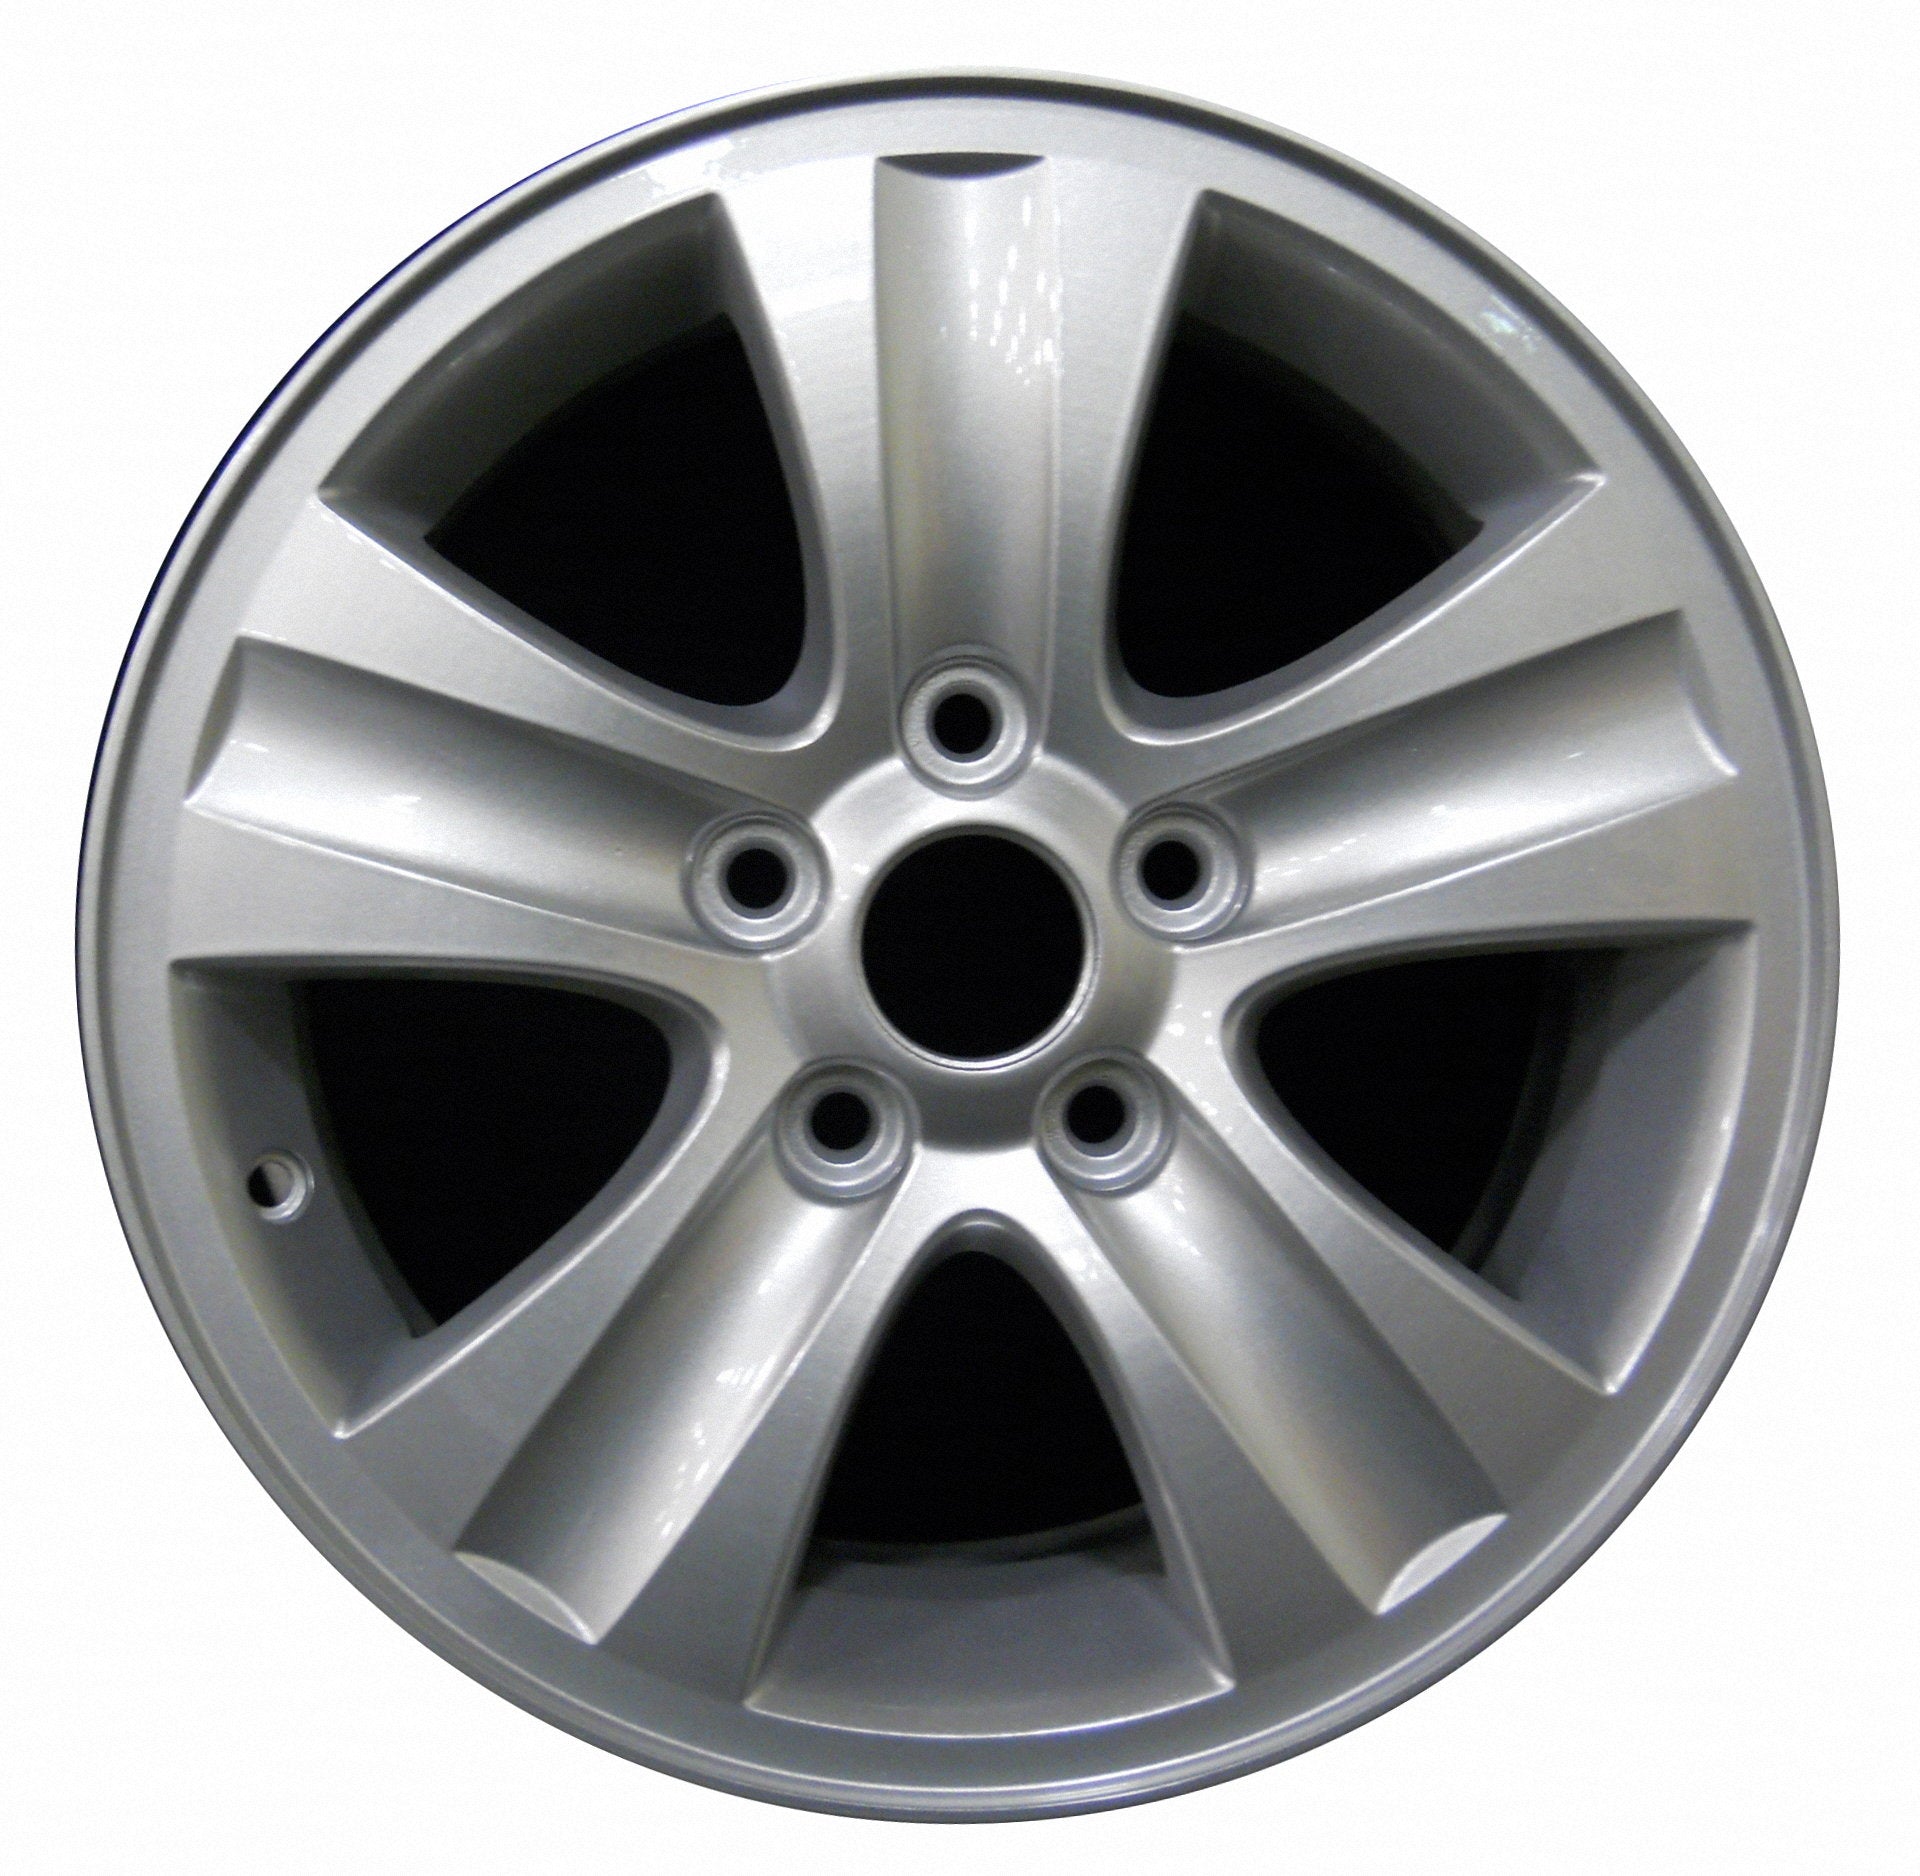 Saturn Vue  2008, 2009, 2010 Factory OEM Car Wheel Size 16x6.5 Alloy WAO.7054.PS08.FF